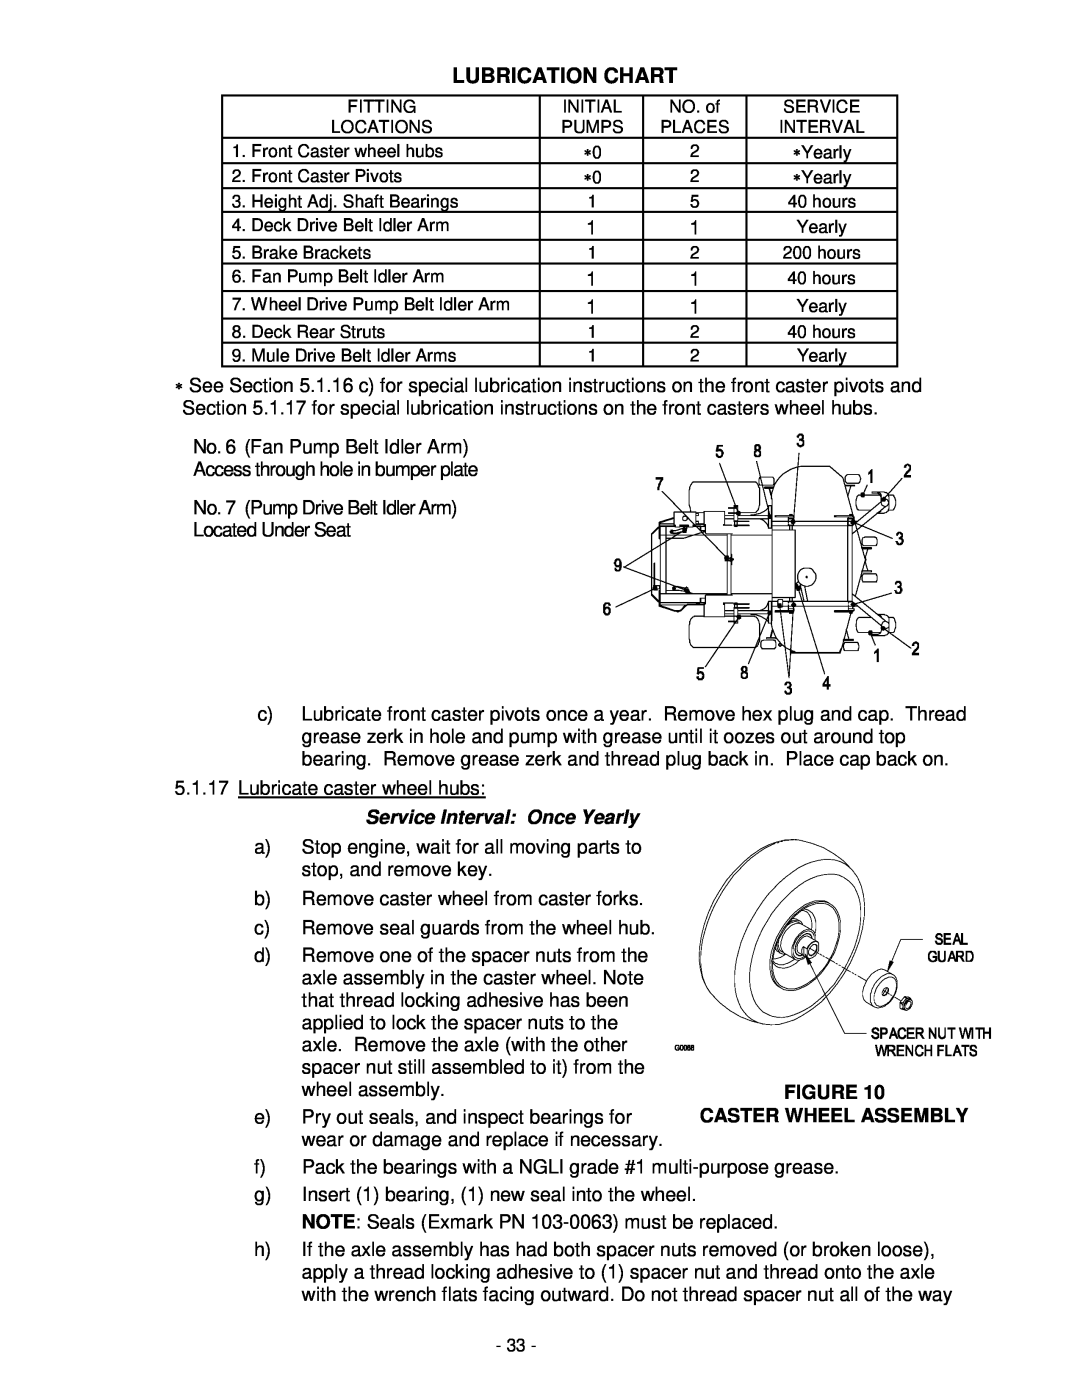 Exmark Lazer Z XP manual Lubrication Chart, Service Interval Once Yearly, Caster Wheel Assembly 